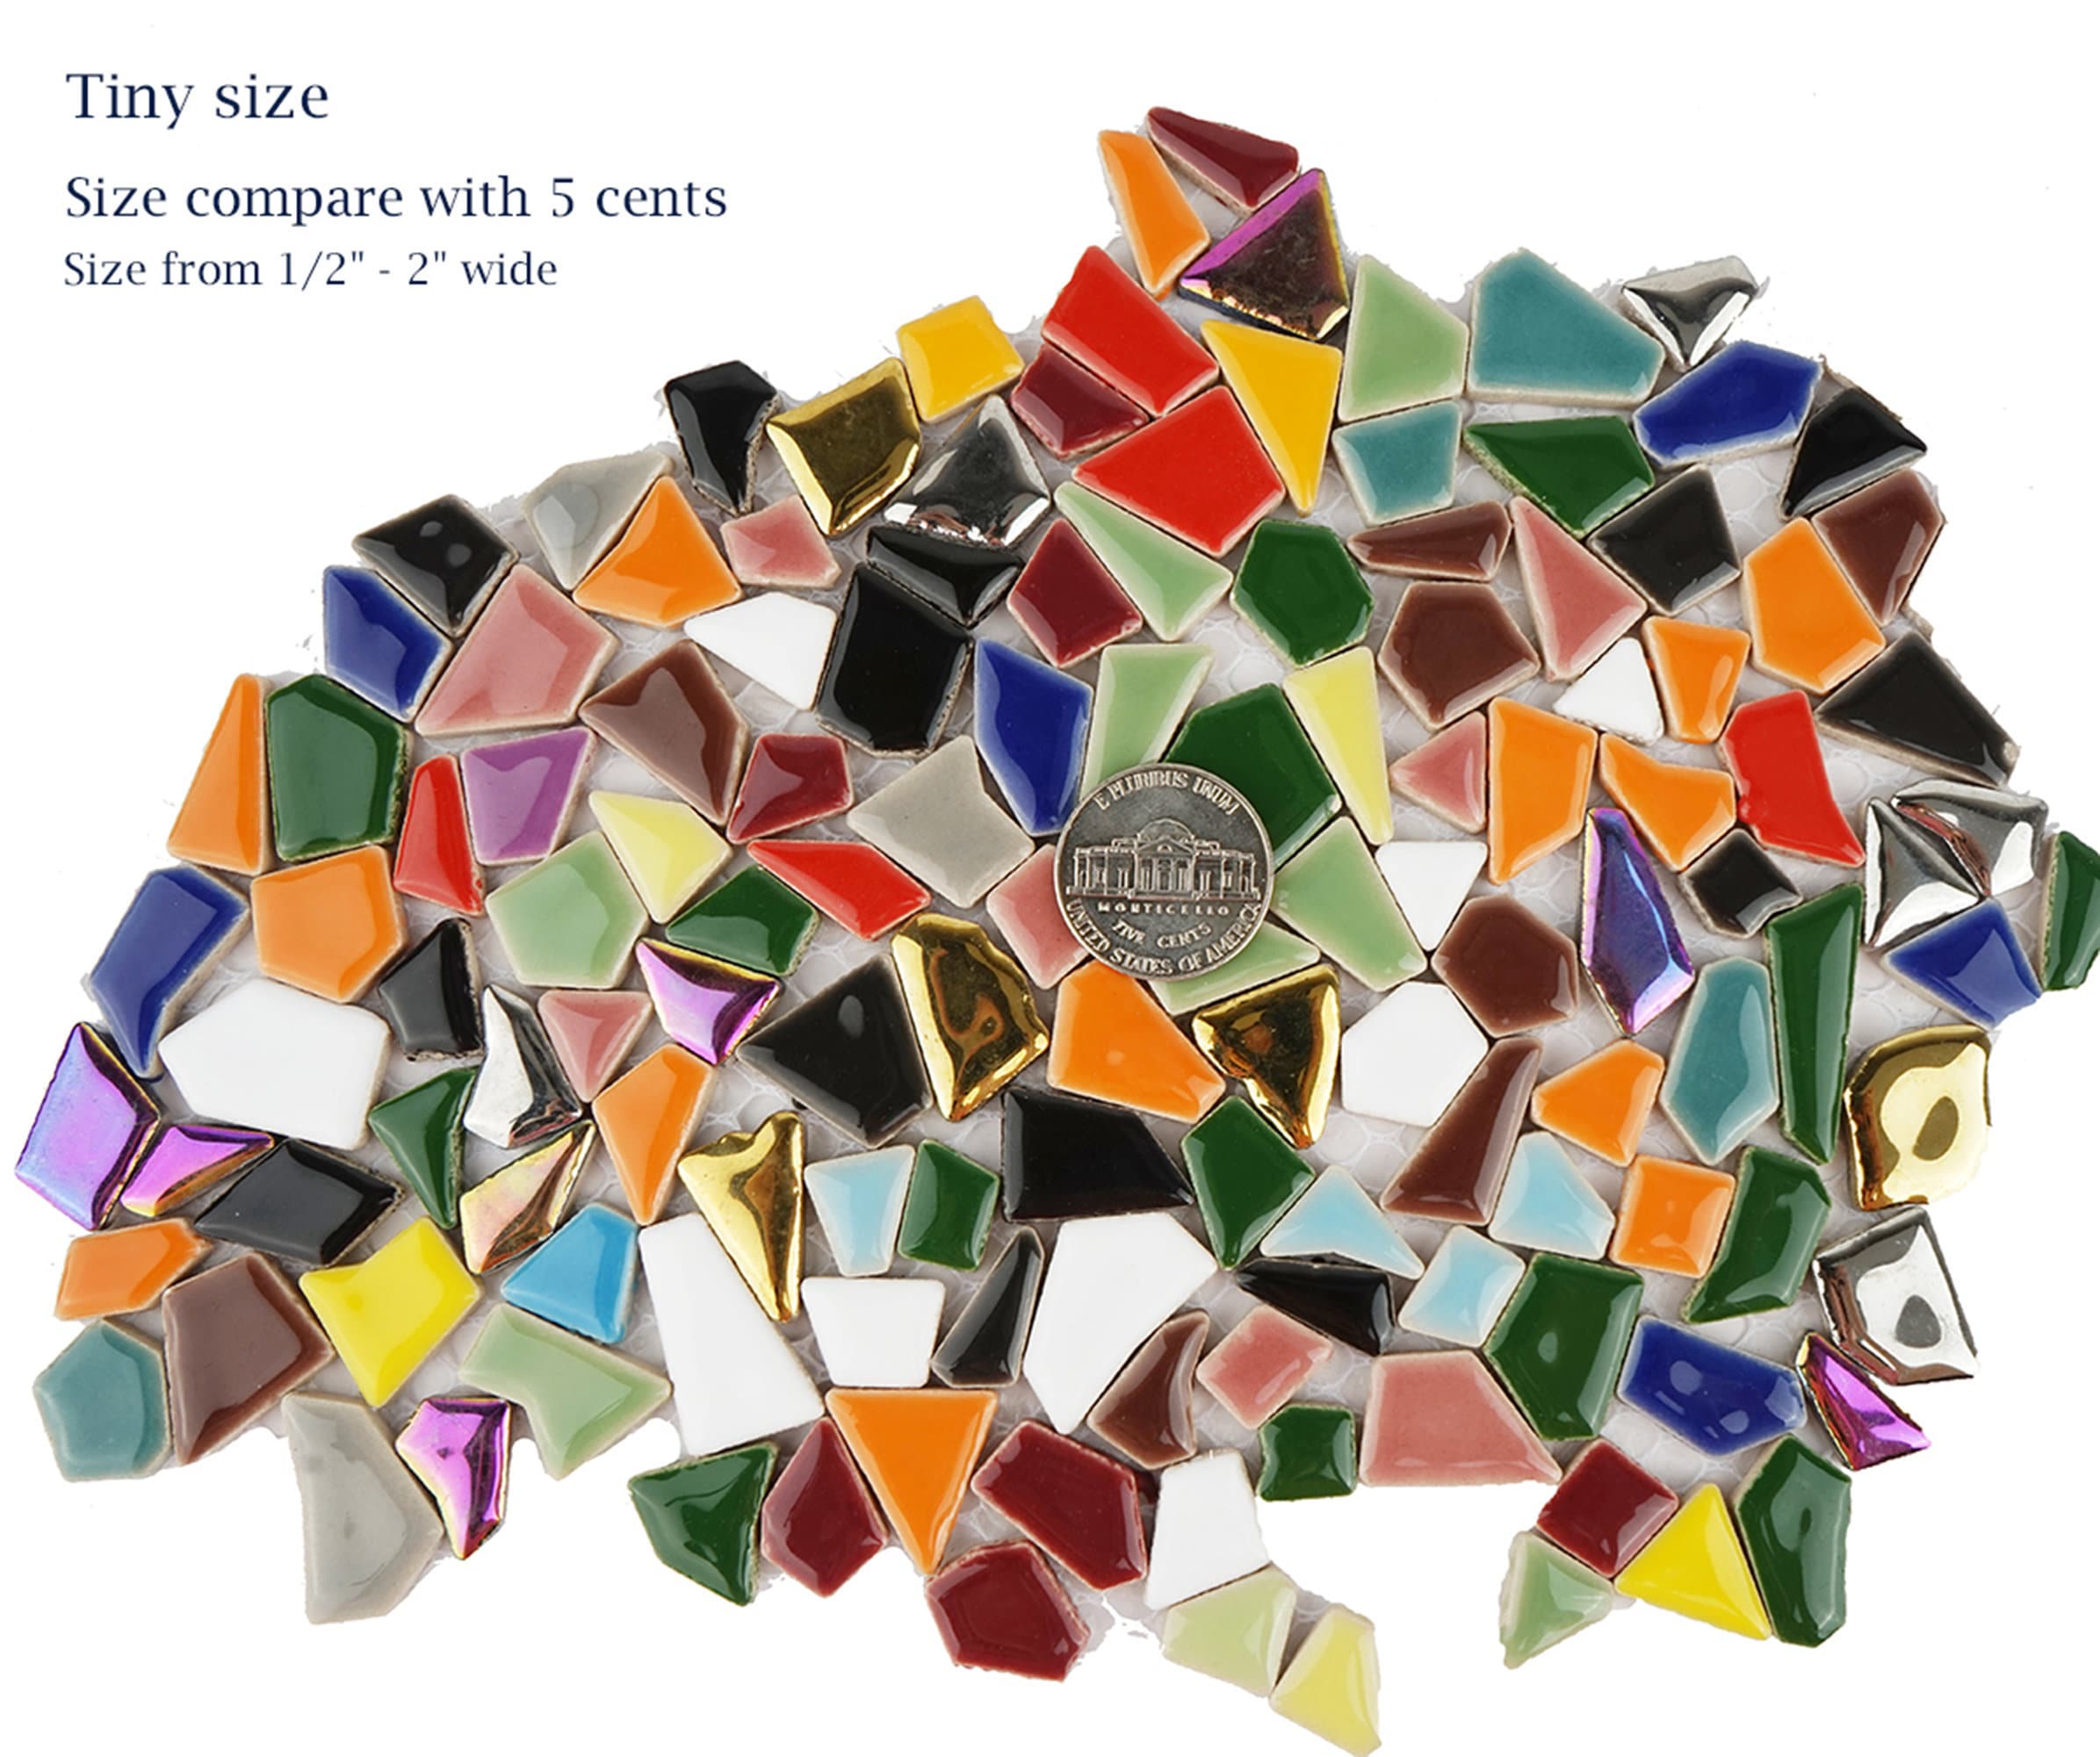 Iridescent Mosaic Glass Pieces Stained Glass Sheet Scraps for Crafts, Mosaic  Til